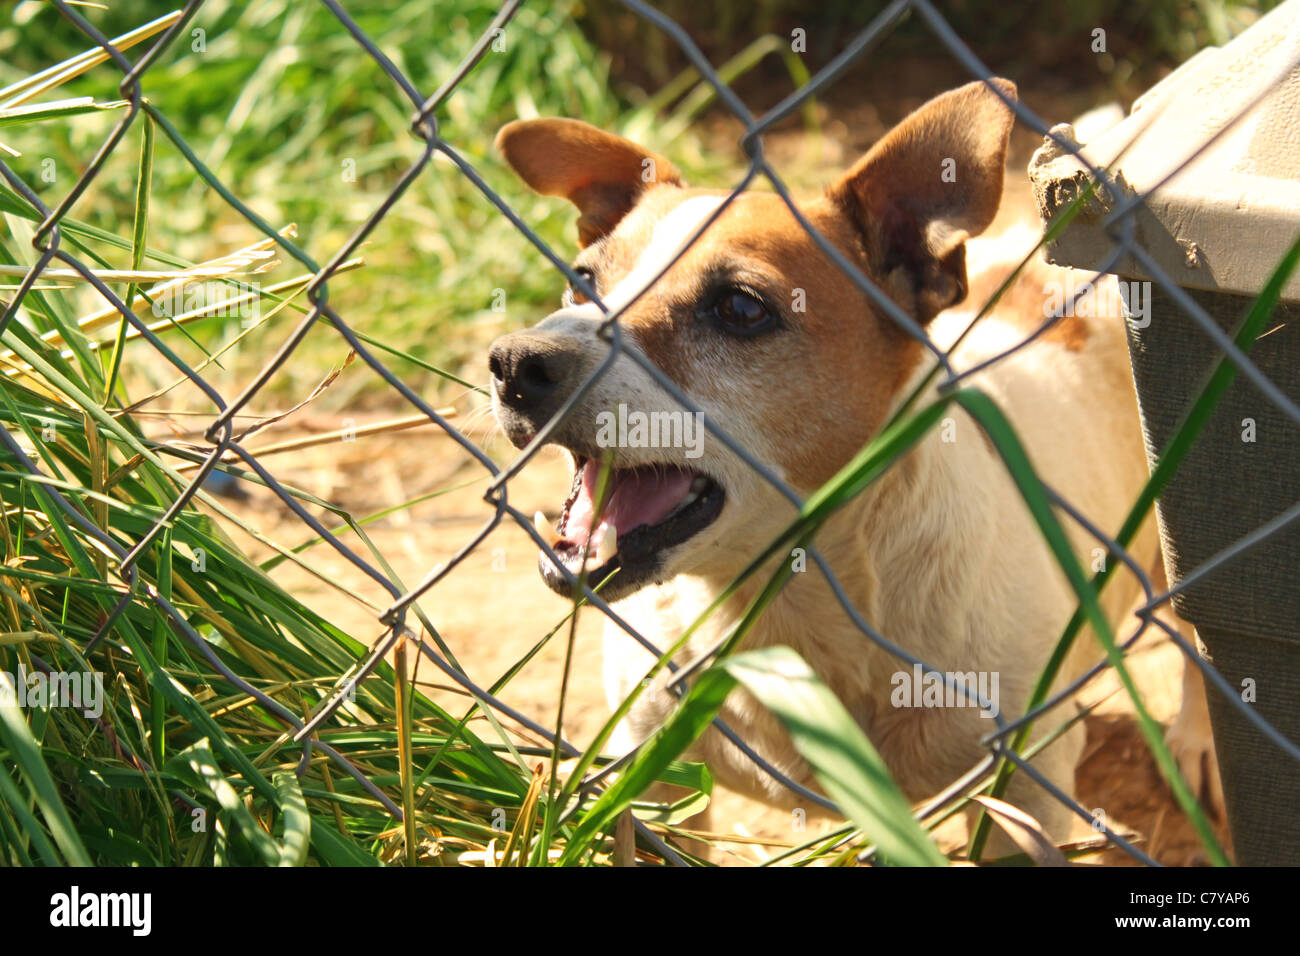 Barking Jack Russel dog behind chain link fence Stock Photo